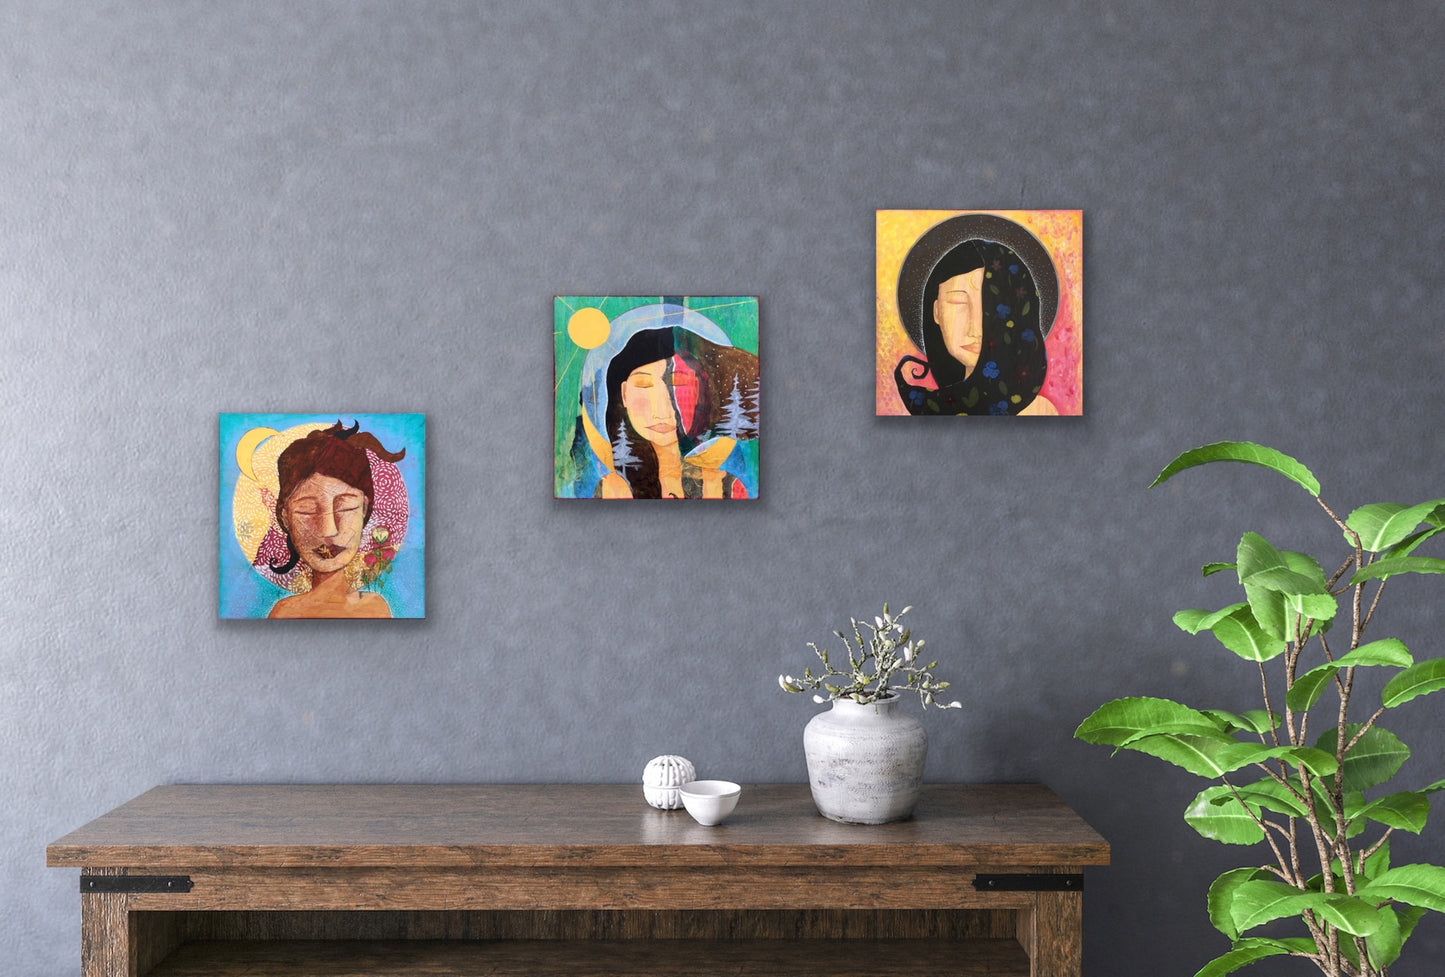 three vibrant, colorful mixed media feminine artworks hanging on a gray wall above a wooden table with white pots and a flower. beside the table is a large green plant